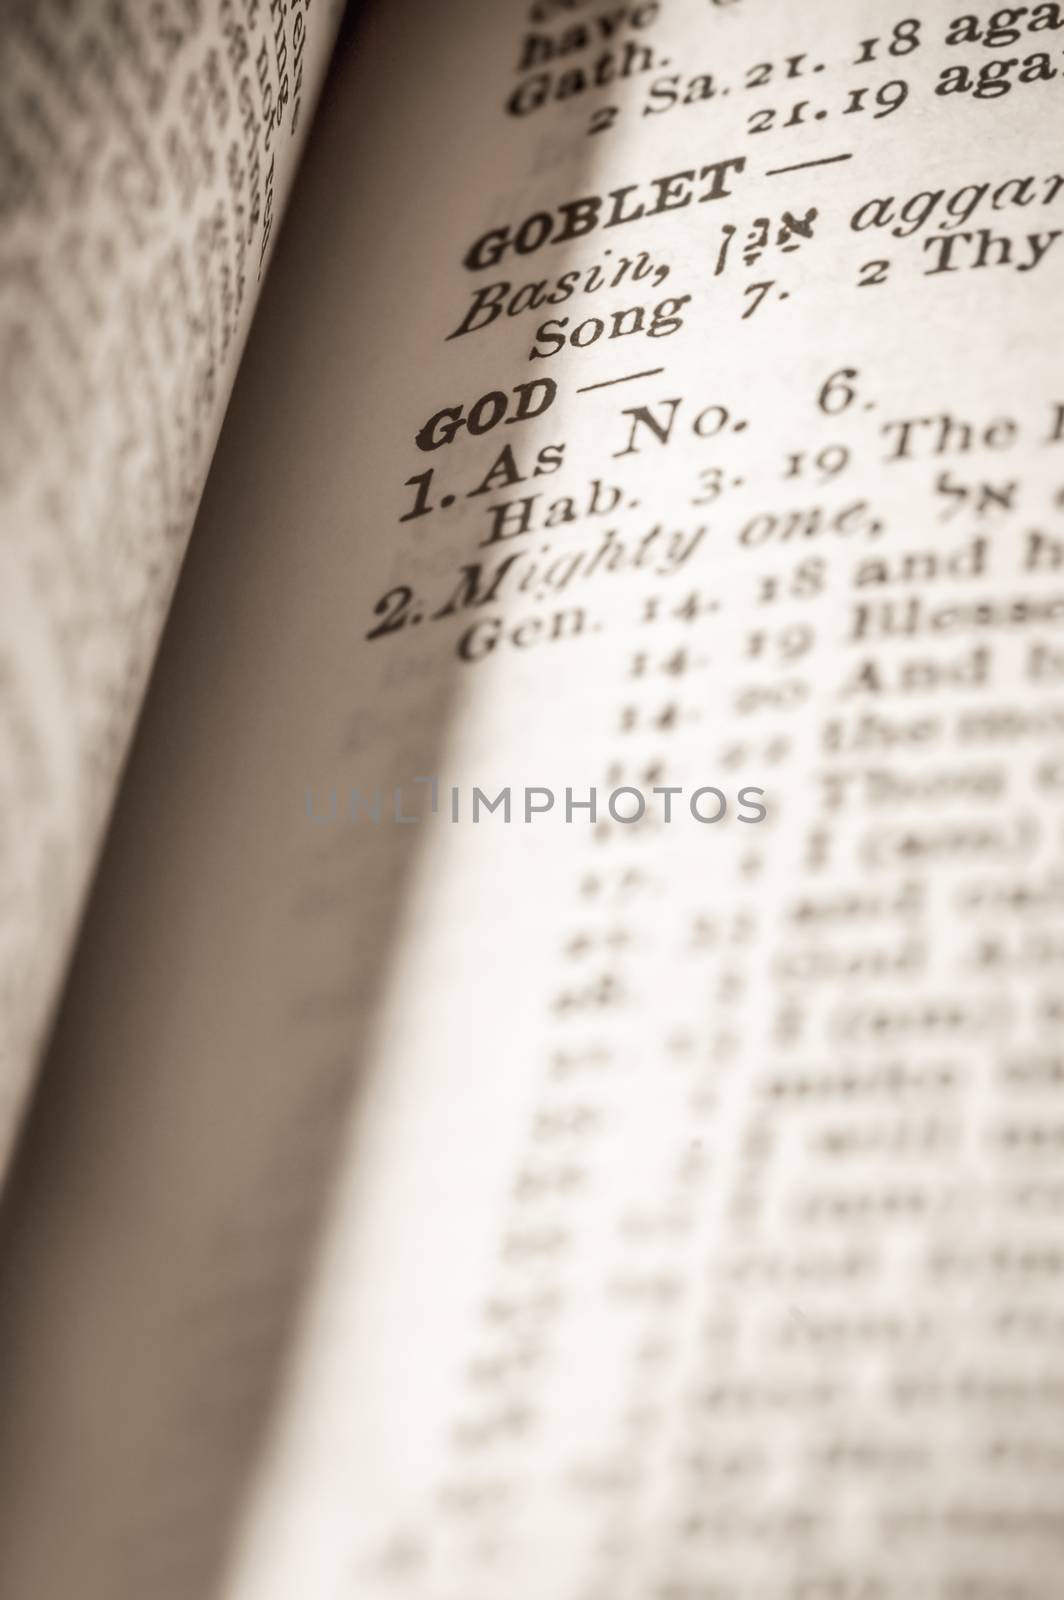 god references in the shadows of a bible page